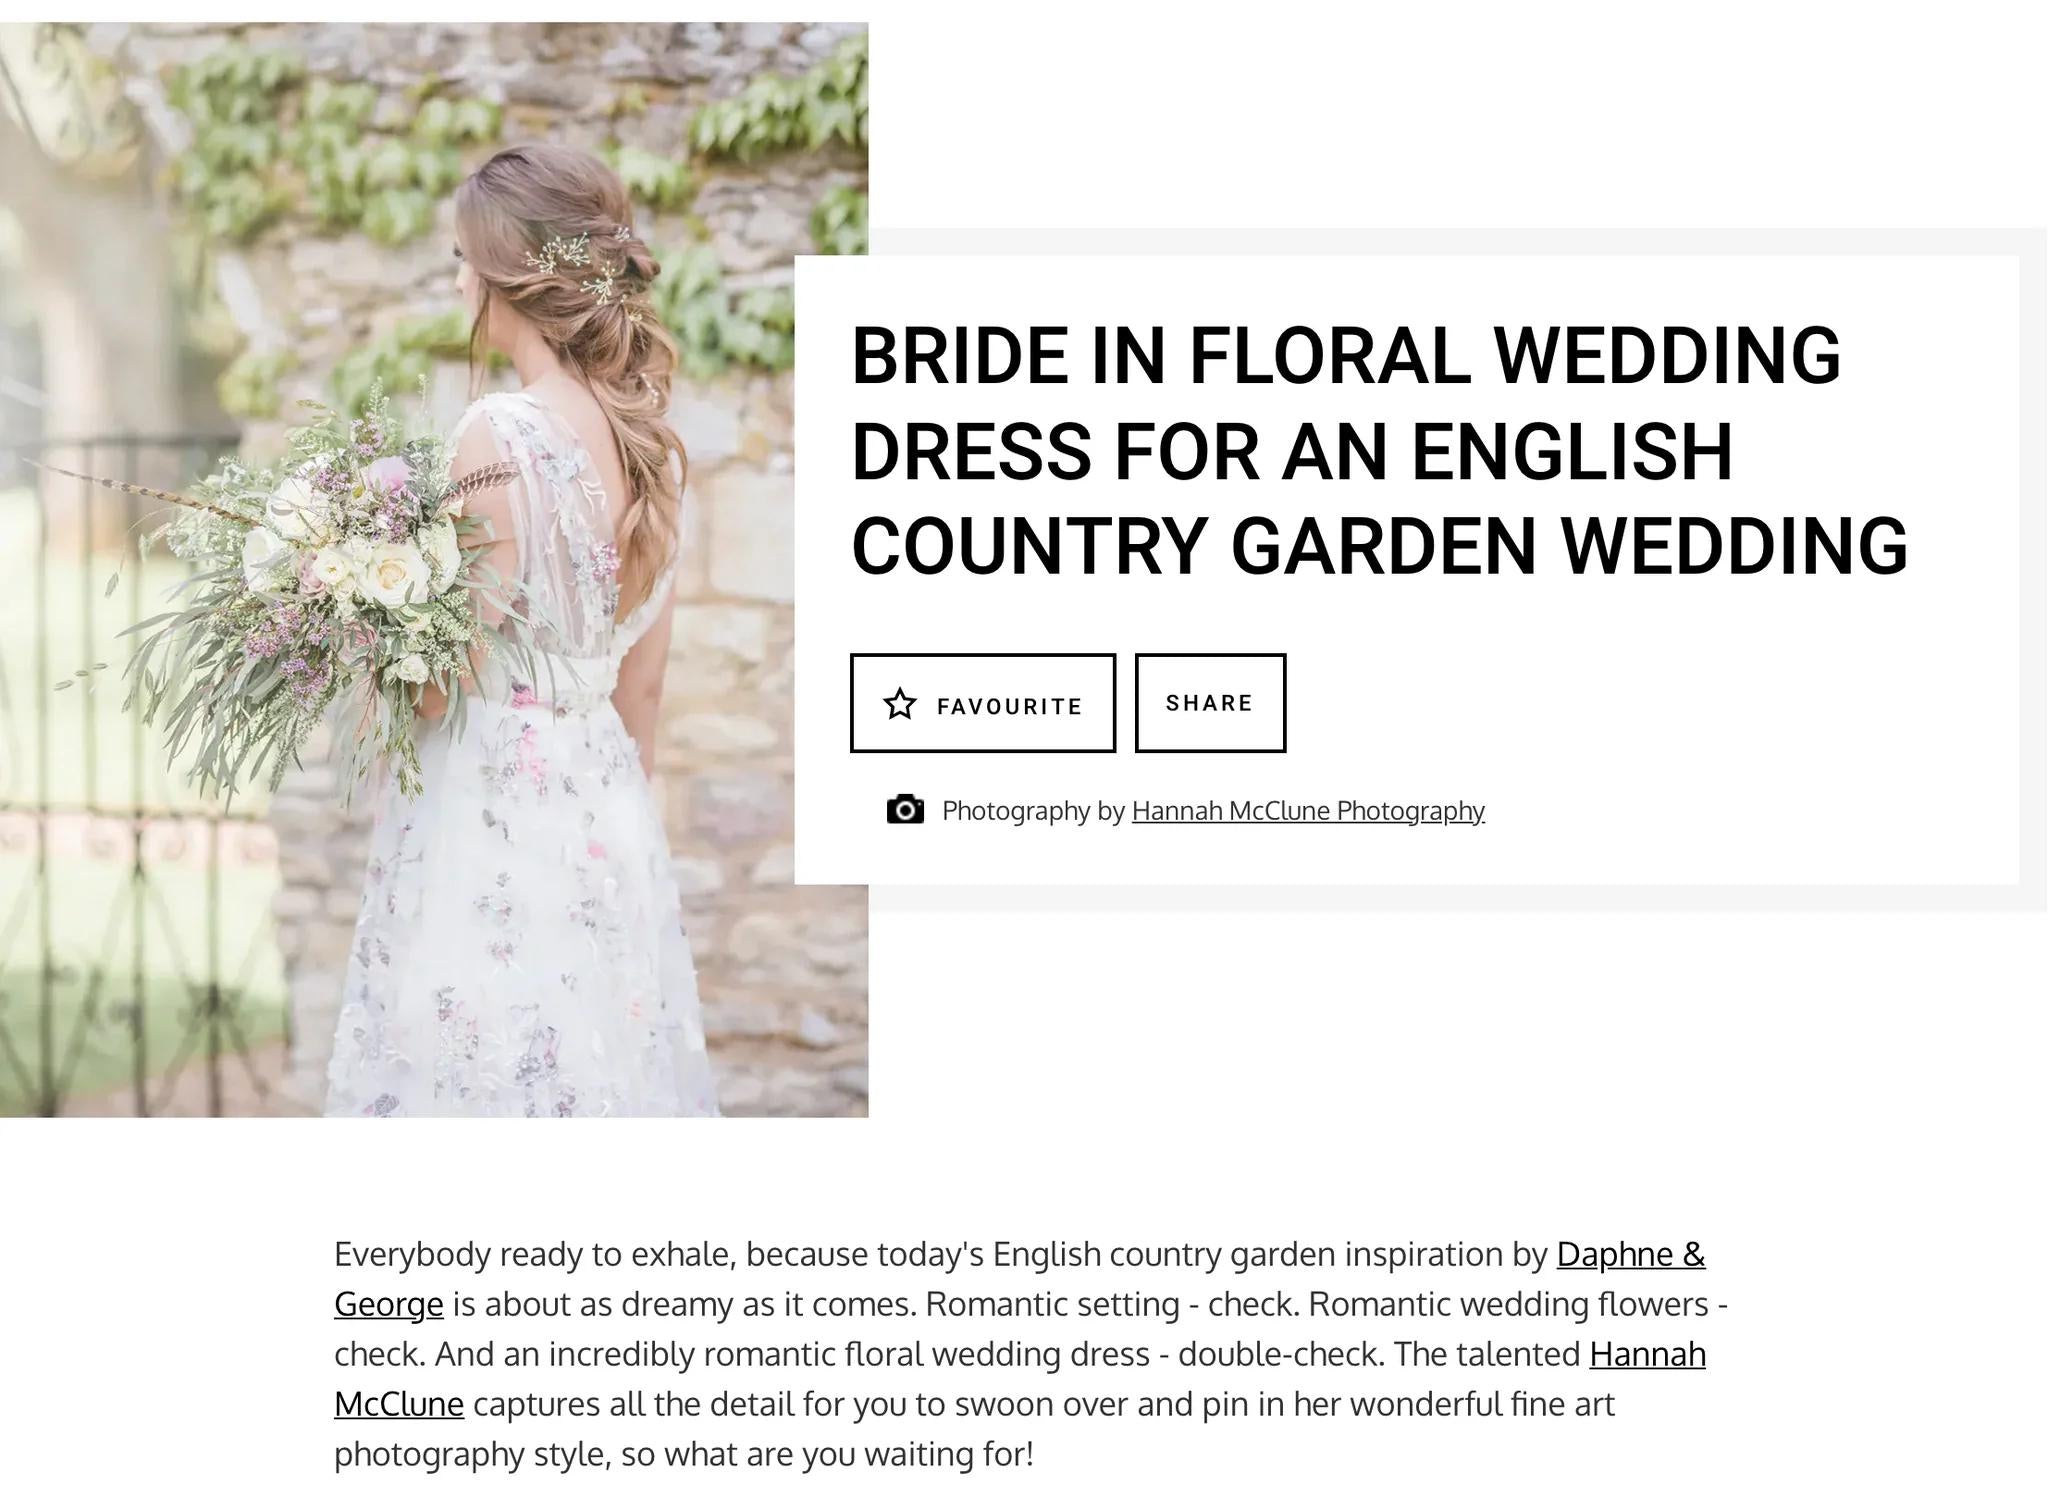 Floral wedding dress for English country wedding